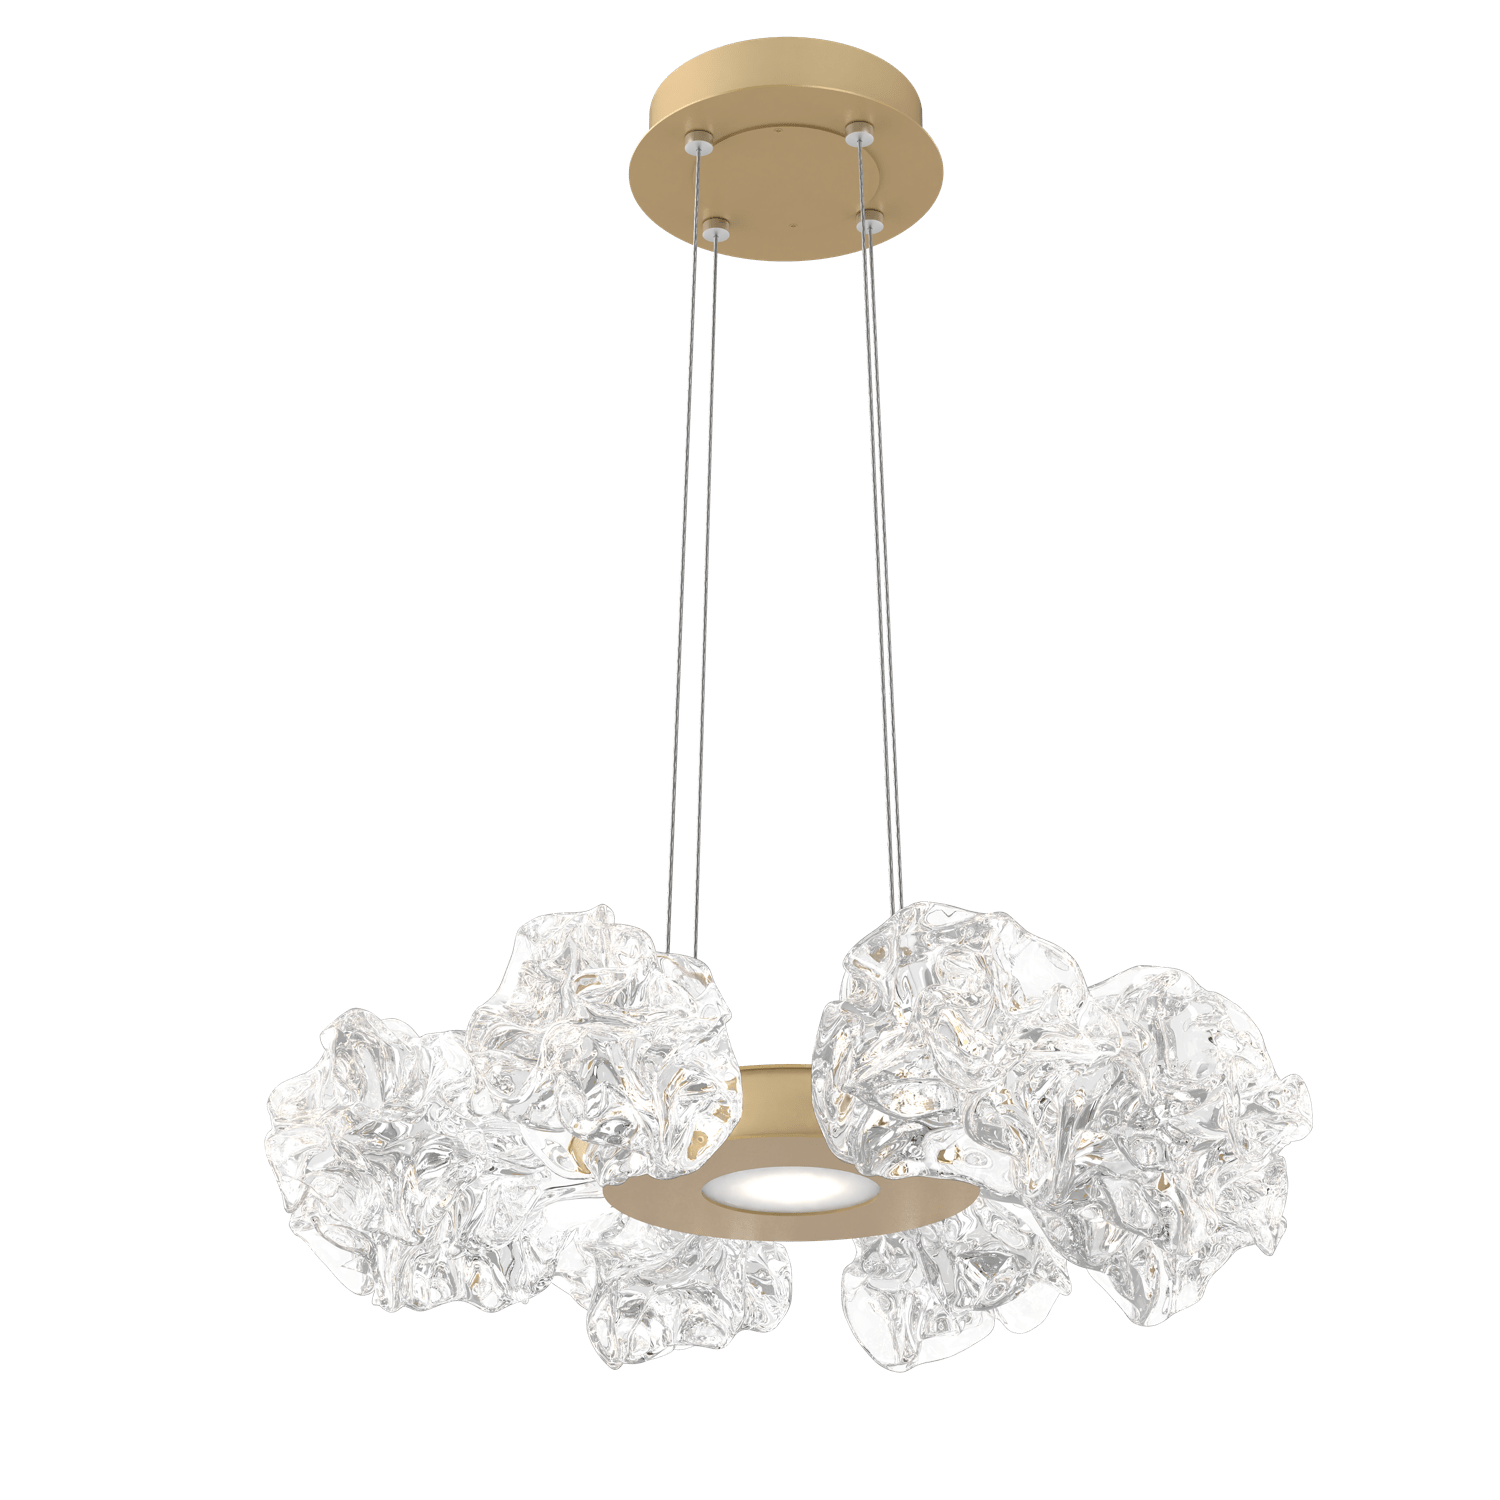 CHB0059-24-GB-Hammerton-Studio-Blossom-24-inch-radial-ring-chandelier-with-gilded-brass-finish-and-clear-handblown-crystal-glass-shades-and-LED-lamping